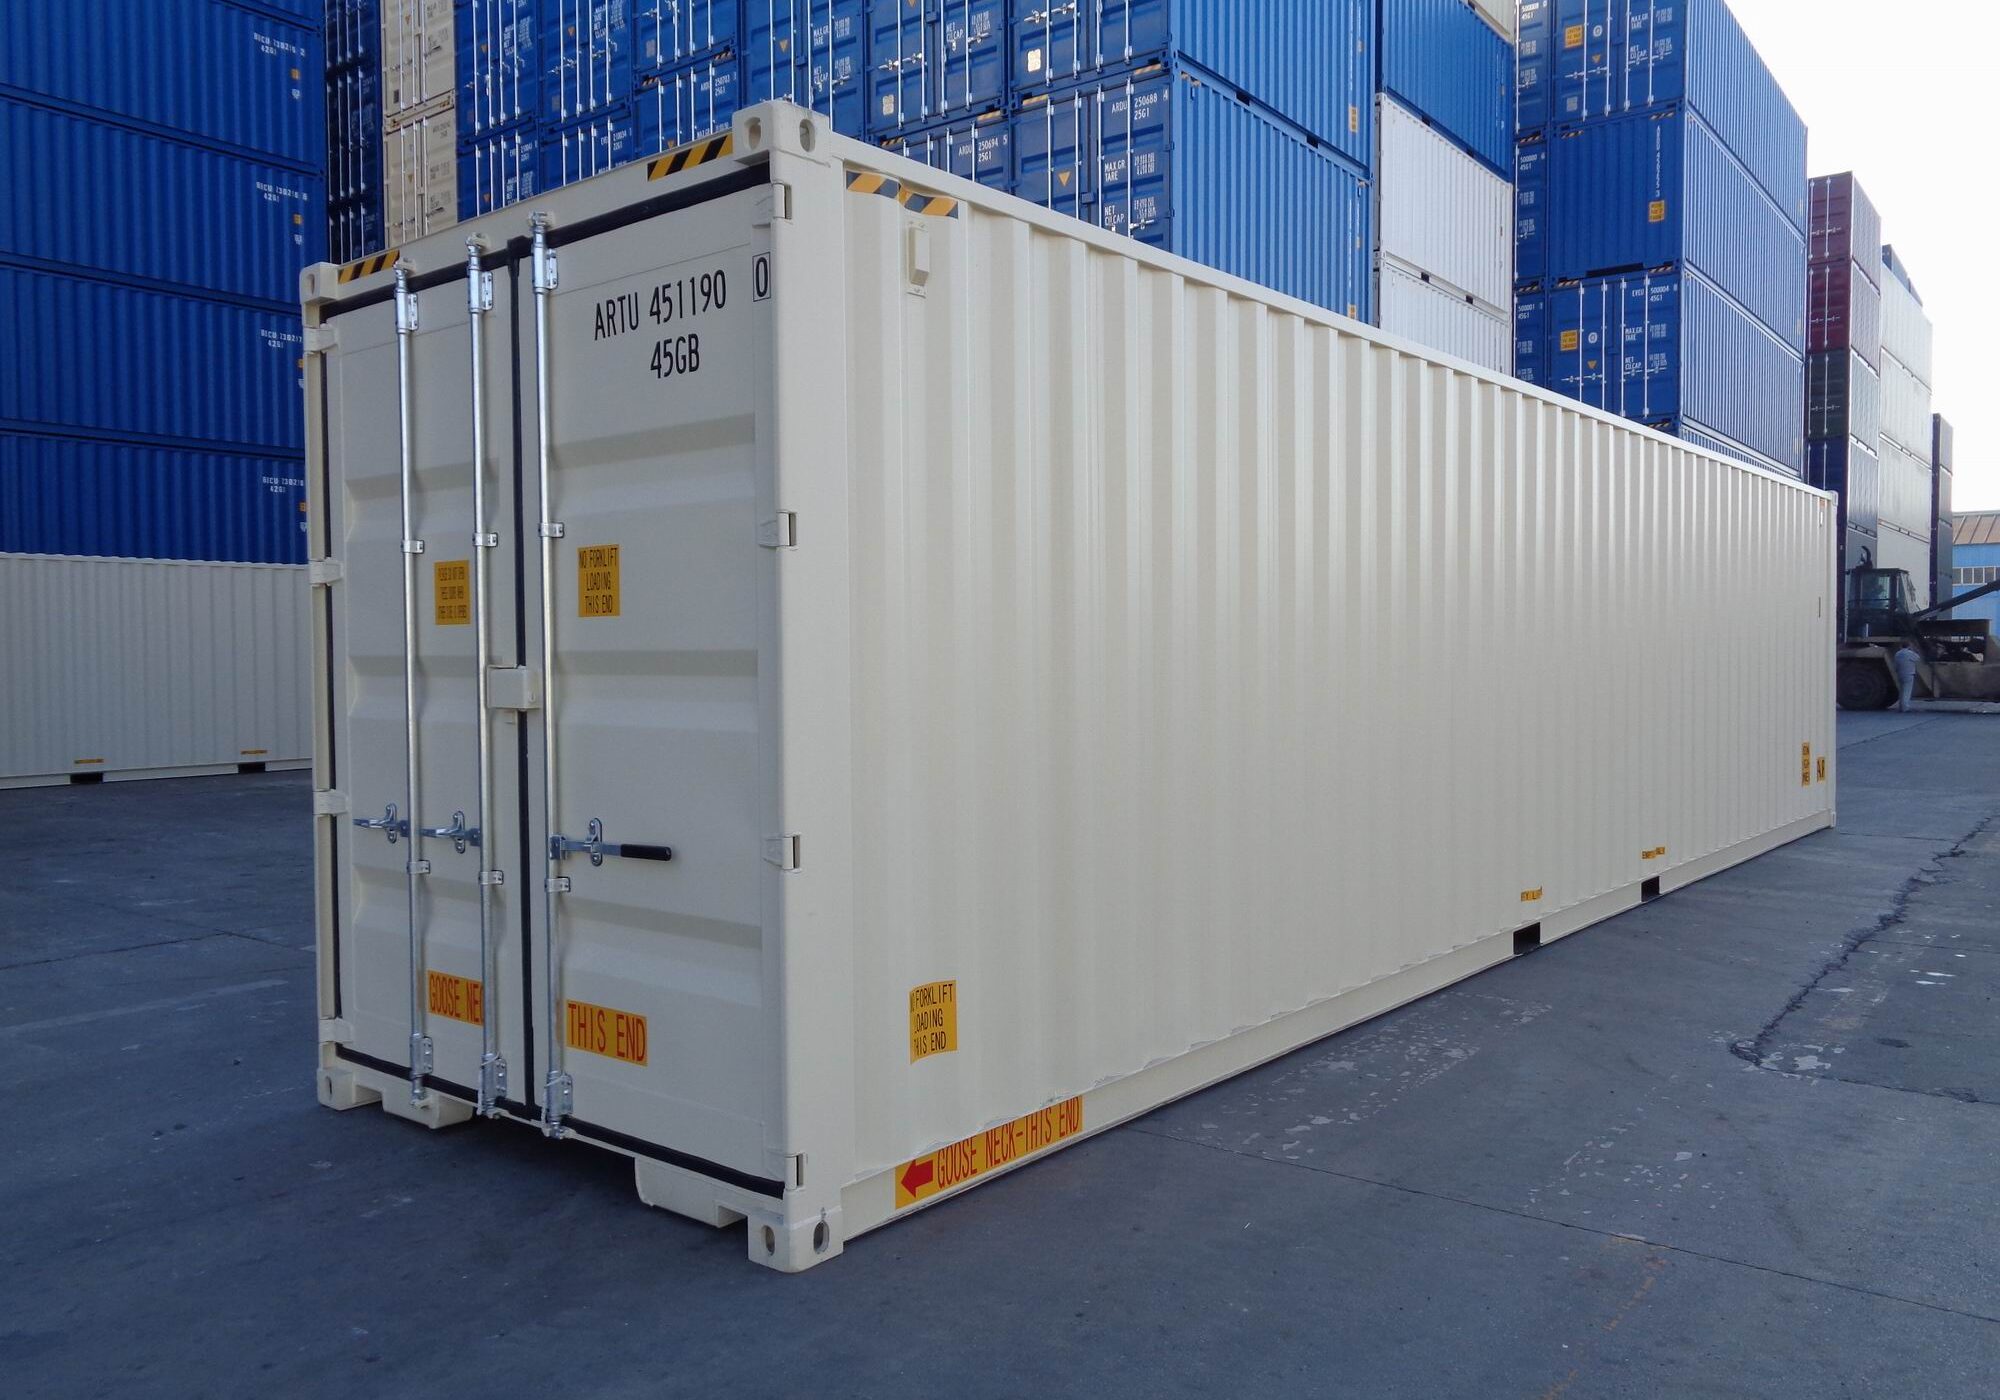 second container